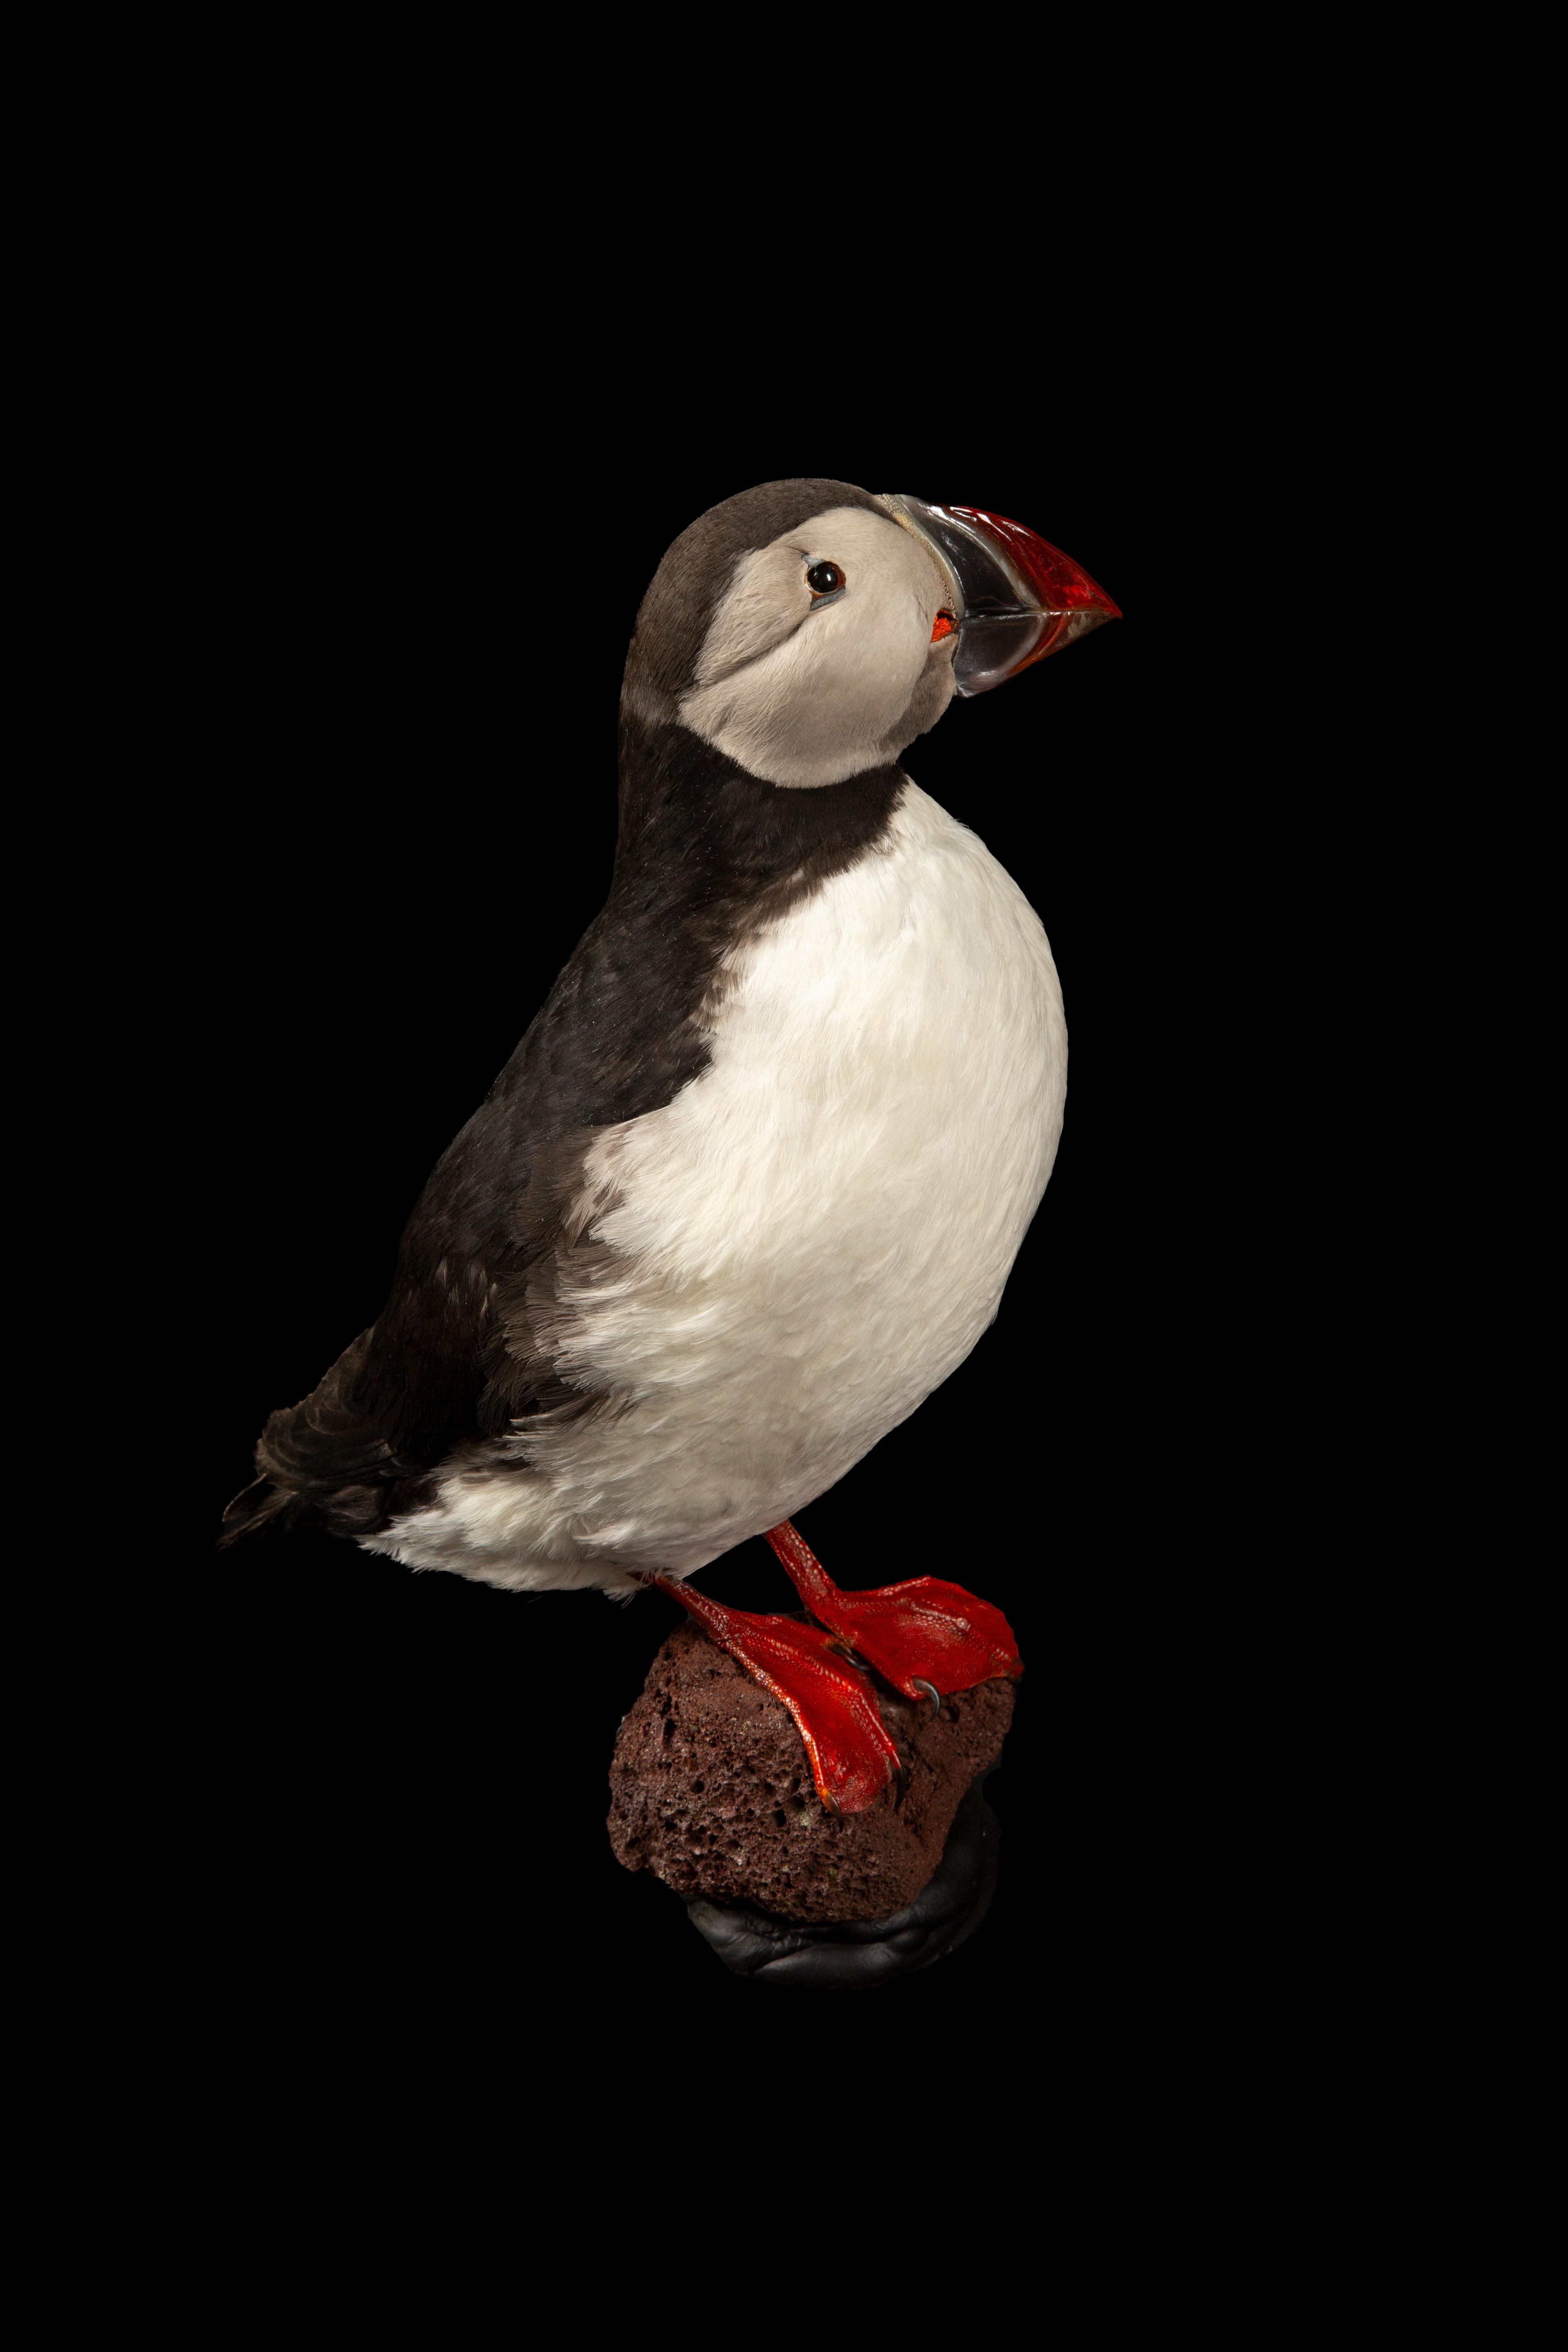 Icelandic Celebrate Nature's Beauty: Taxidermy Atlantic Puffin Bird For Sale